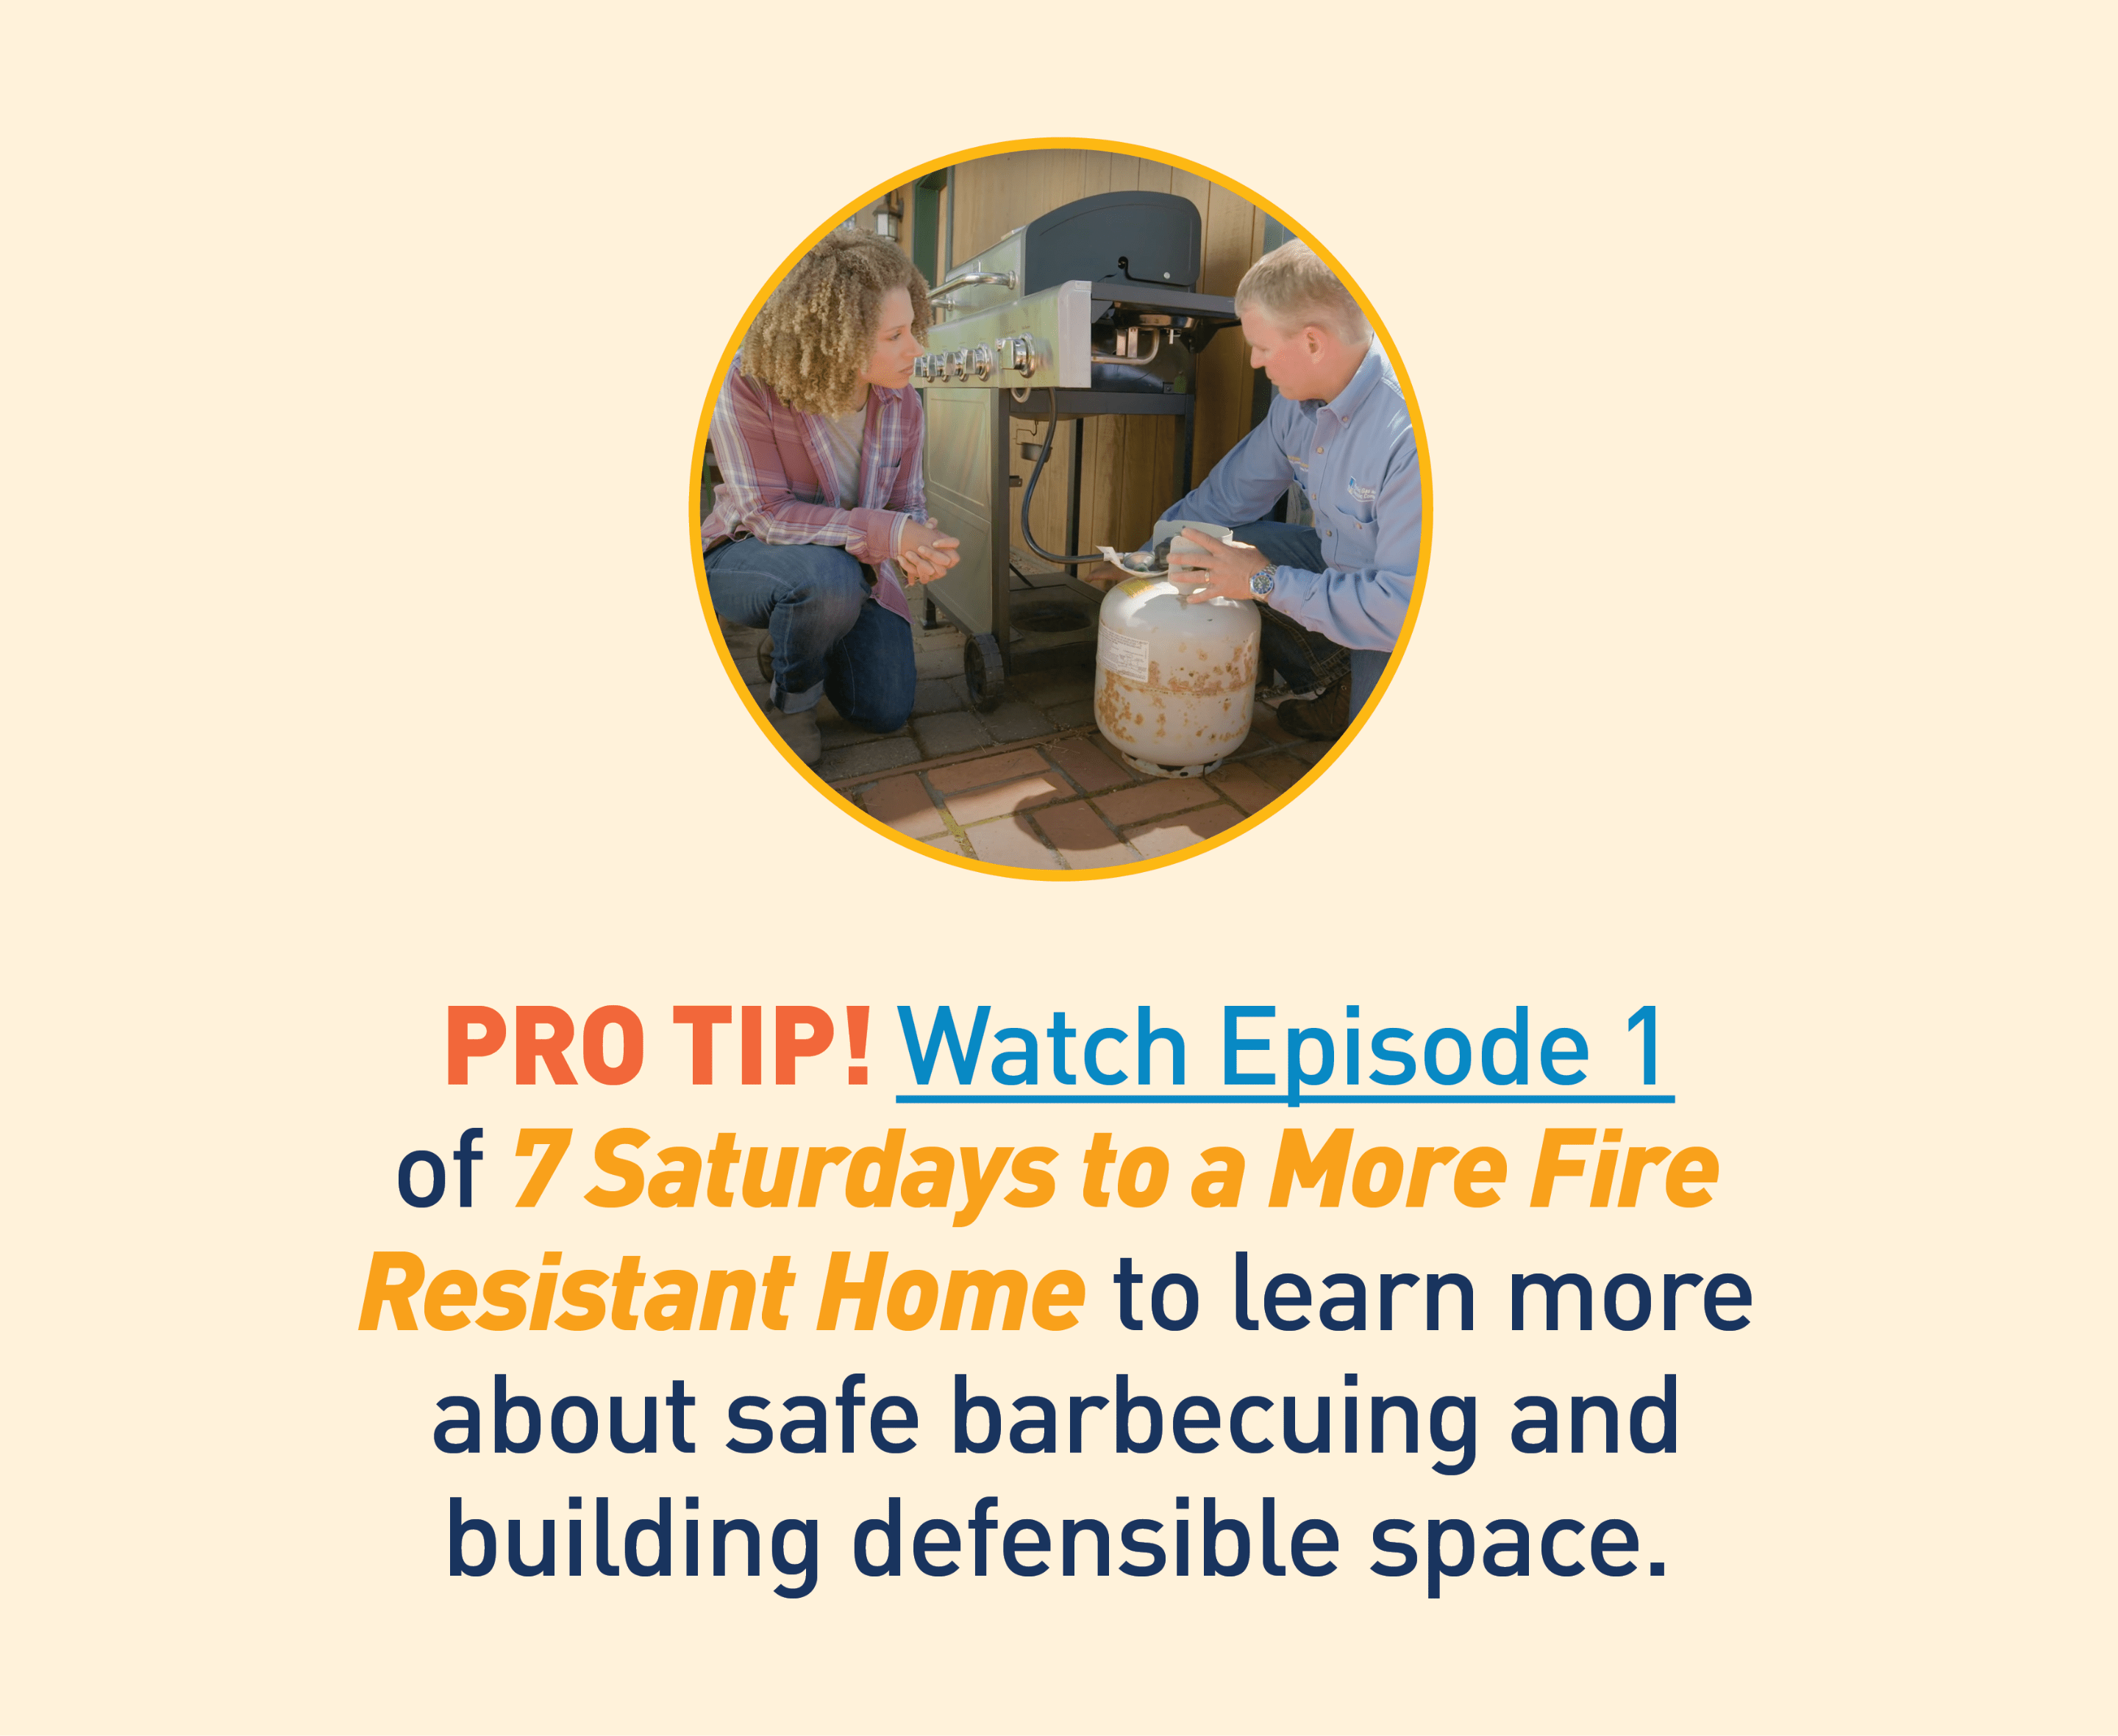 Image Description: Image of 7 Saturdays host next to barbecue. Text:   PRO TIP! Watch Episode 1 of 7 Saturdays to a More Fire Resistant Home to learn more about safe barbecuing and building defensible space.